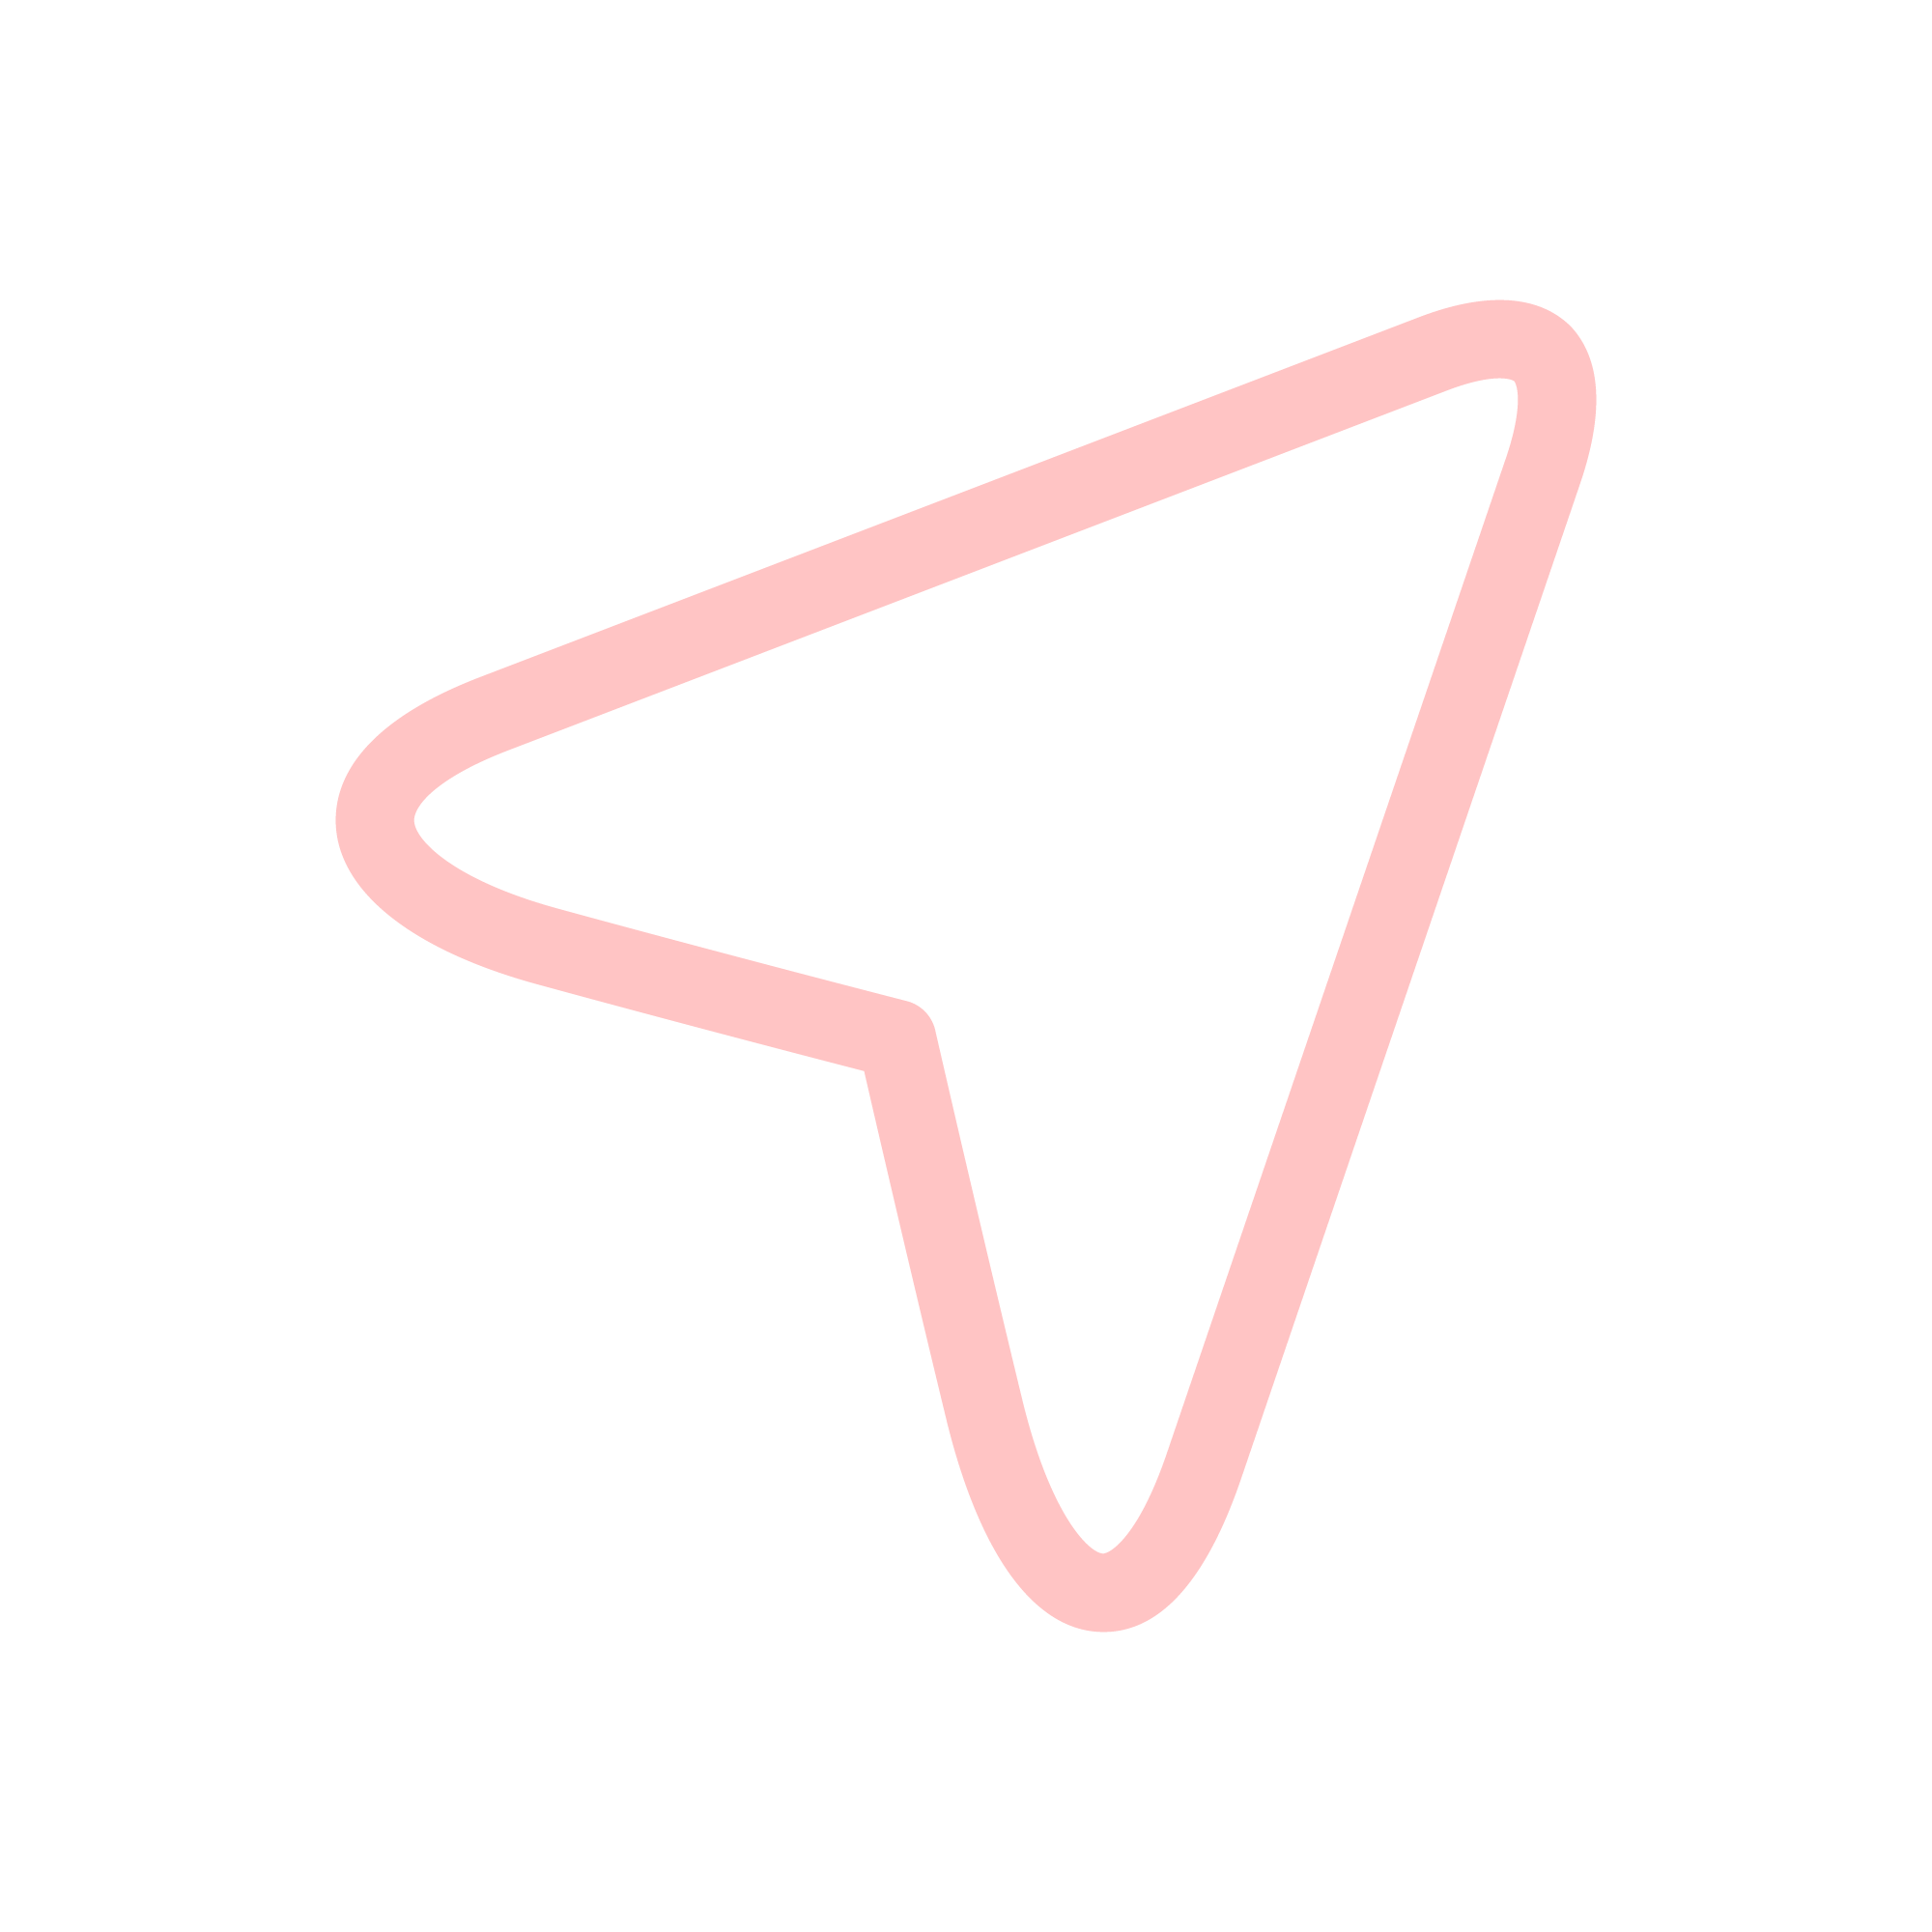 Pink paper airplane icon